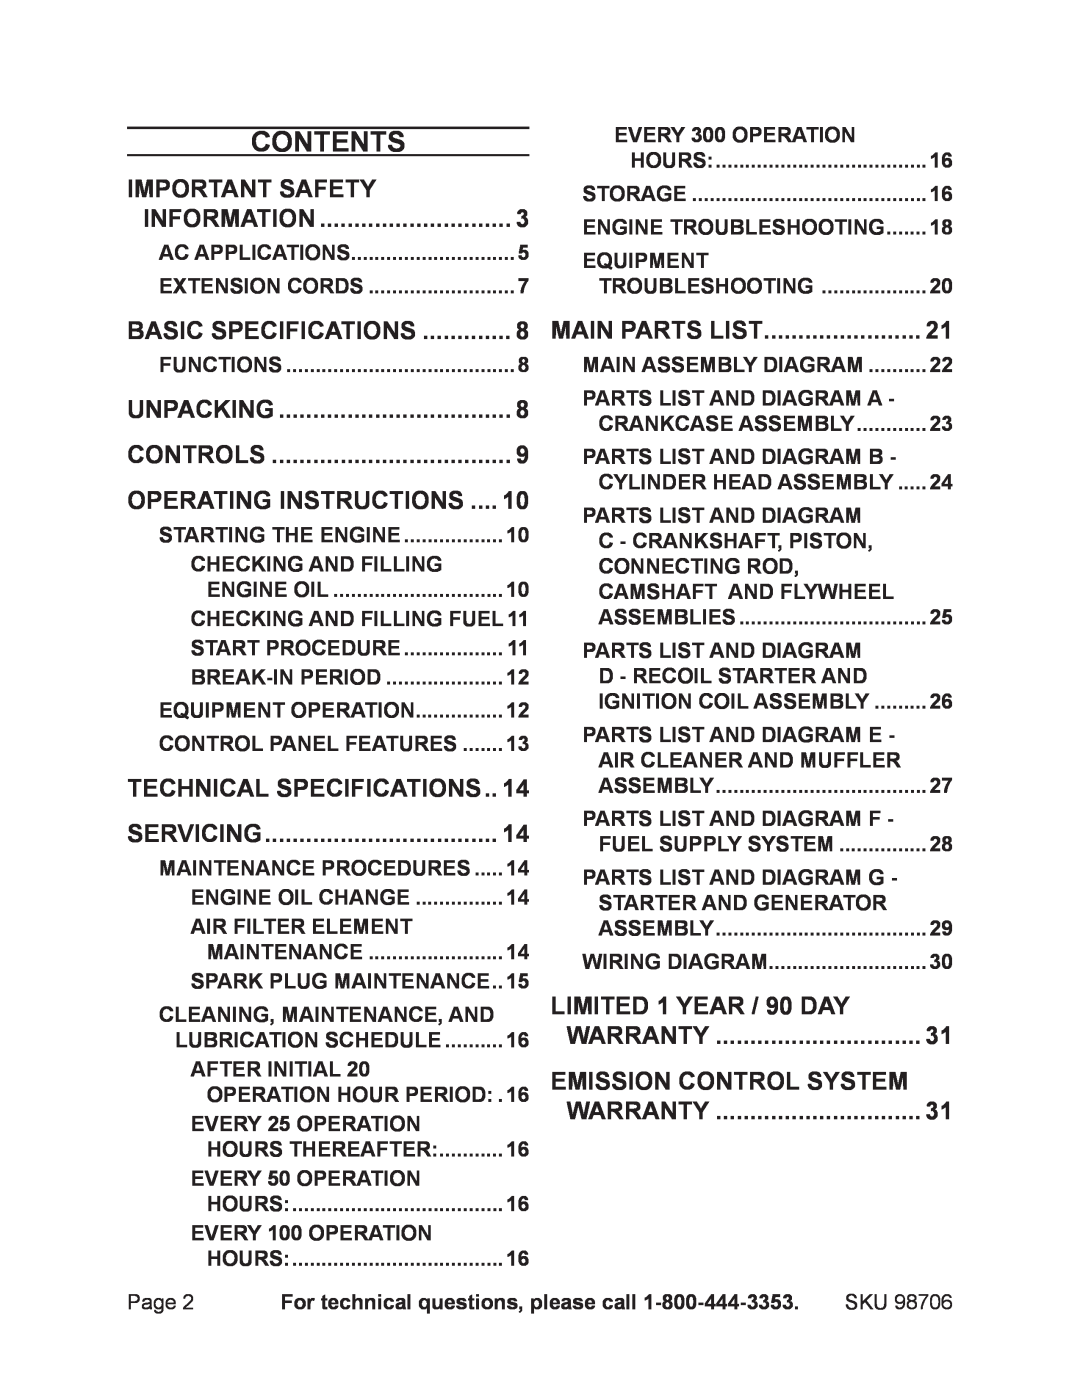 Chicago Electric 98706 manual Contents 